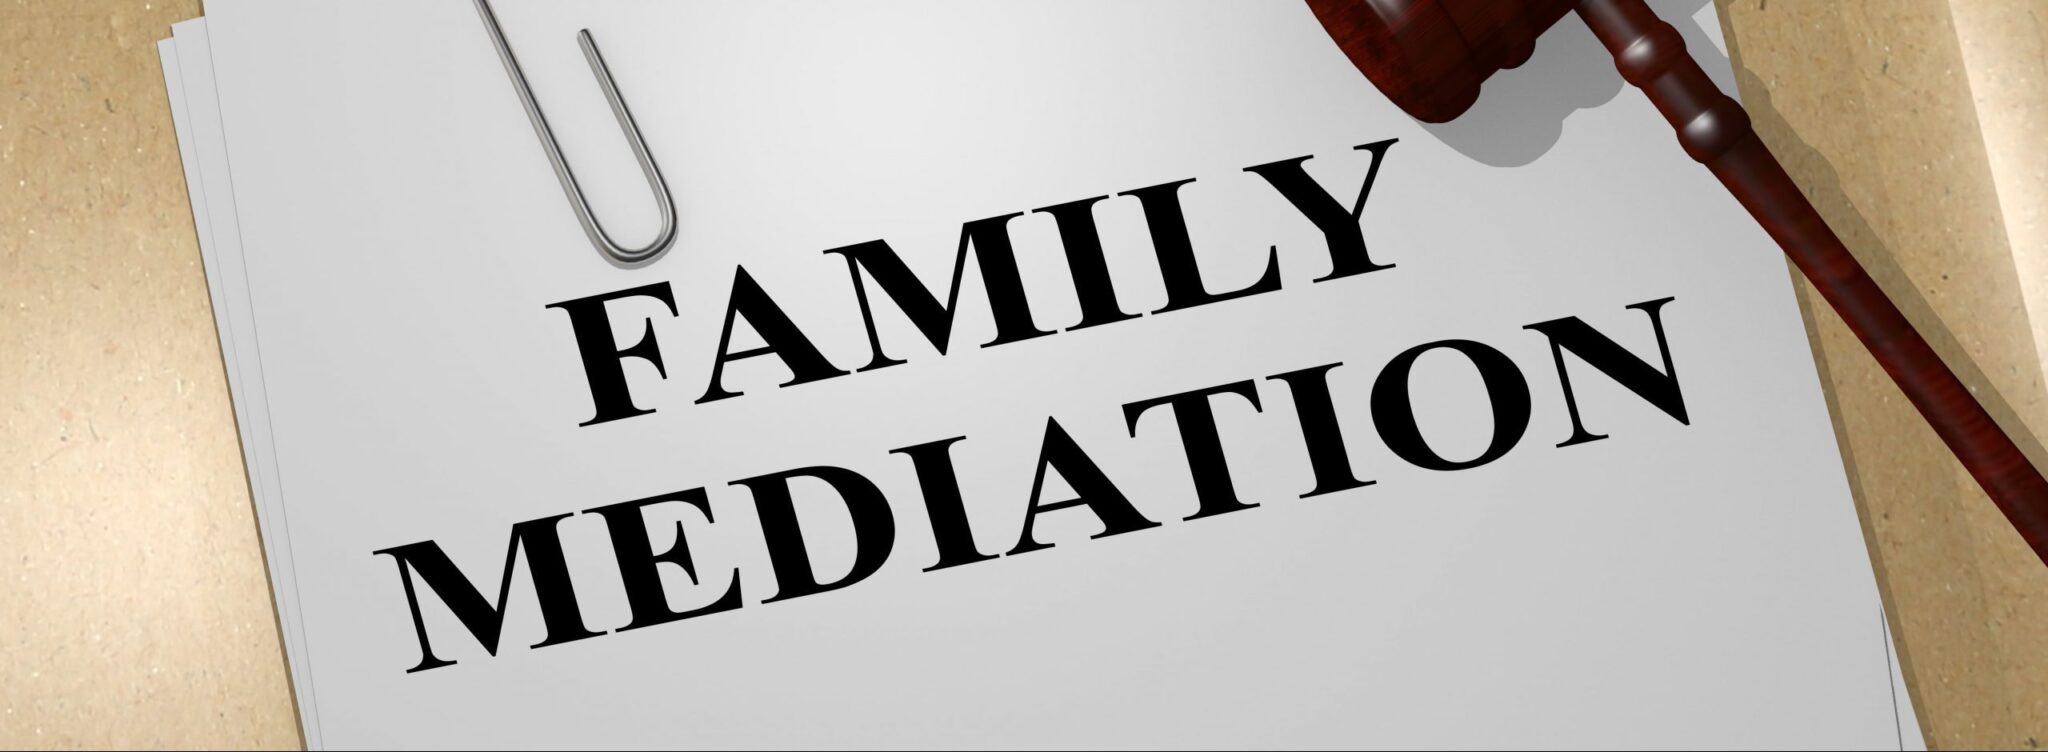 Family mediation: What it is and how it works